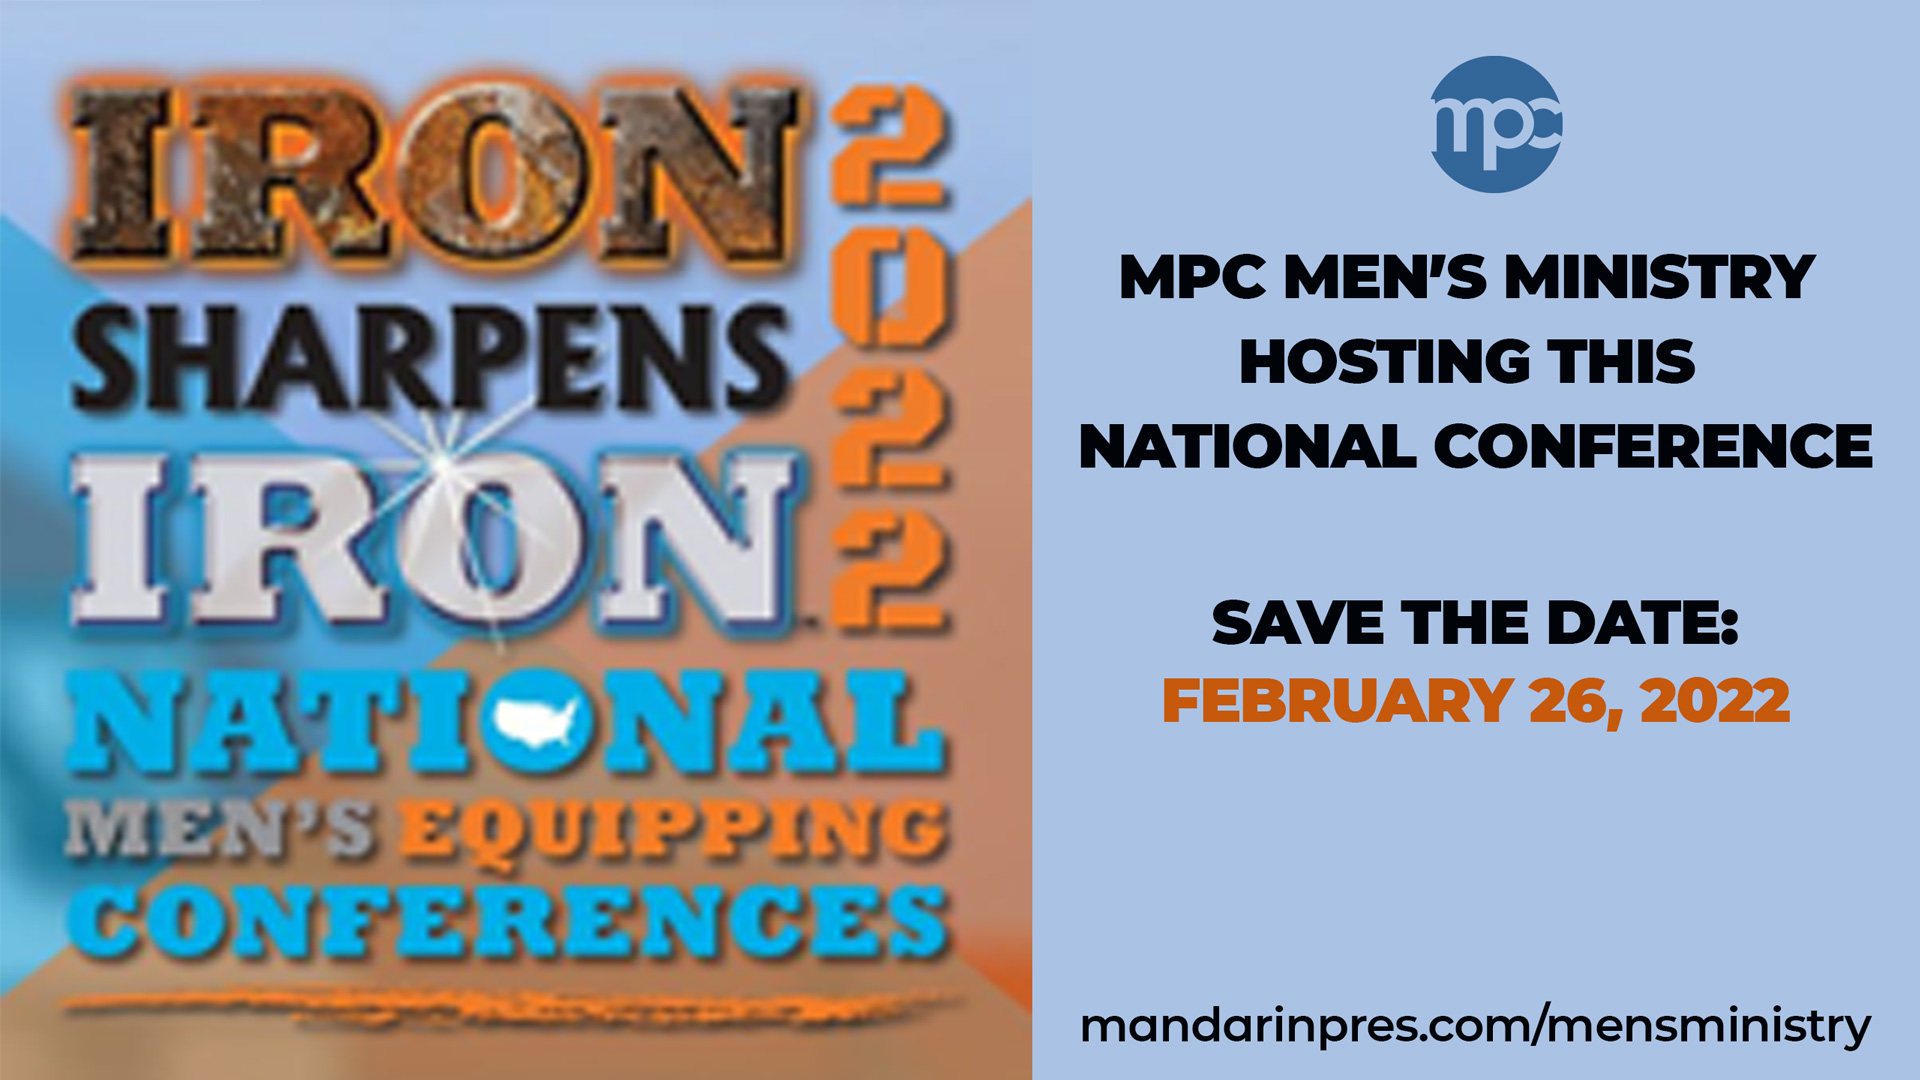 MPC Men's Ministry

"Men Proclaiming Christ". Register for 'Iron Sharpens Iron' Conference!
